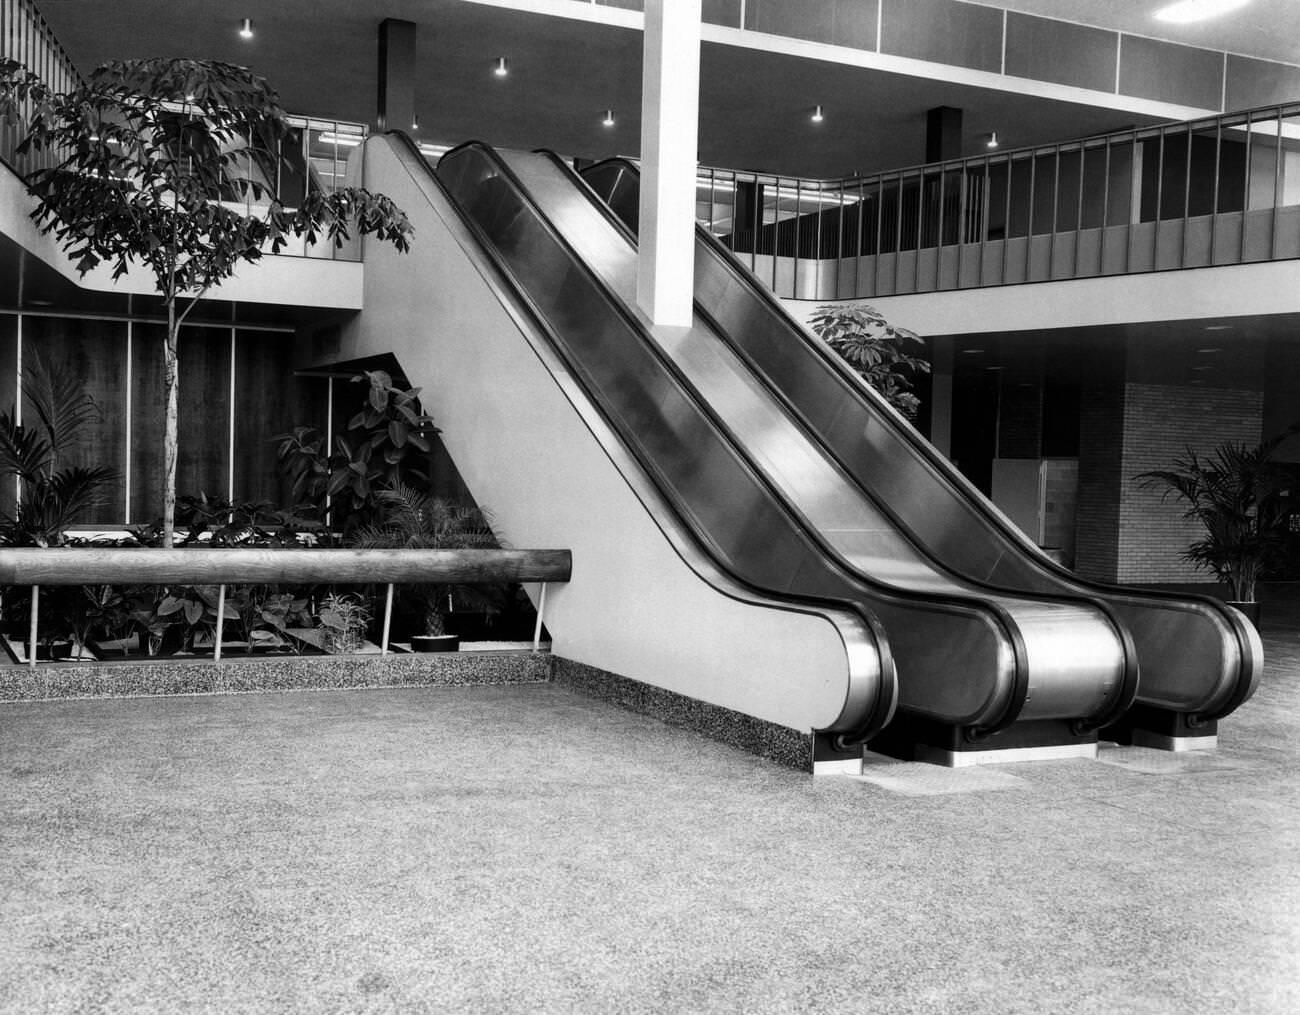 The Lobby Entrance With Escalators At The Aqueduct Racetrack In Queens After A Remodel, 1959.